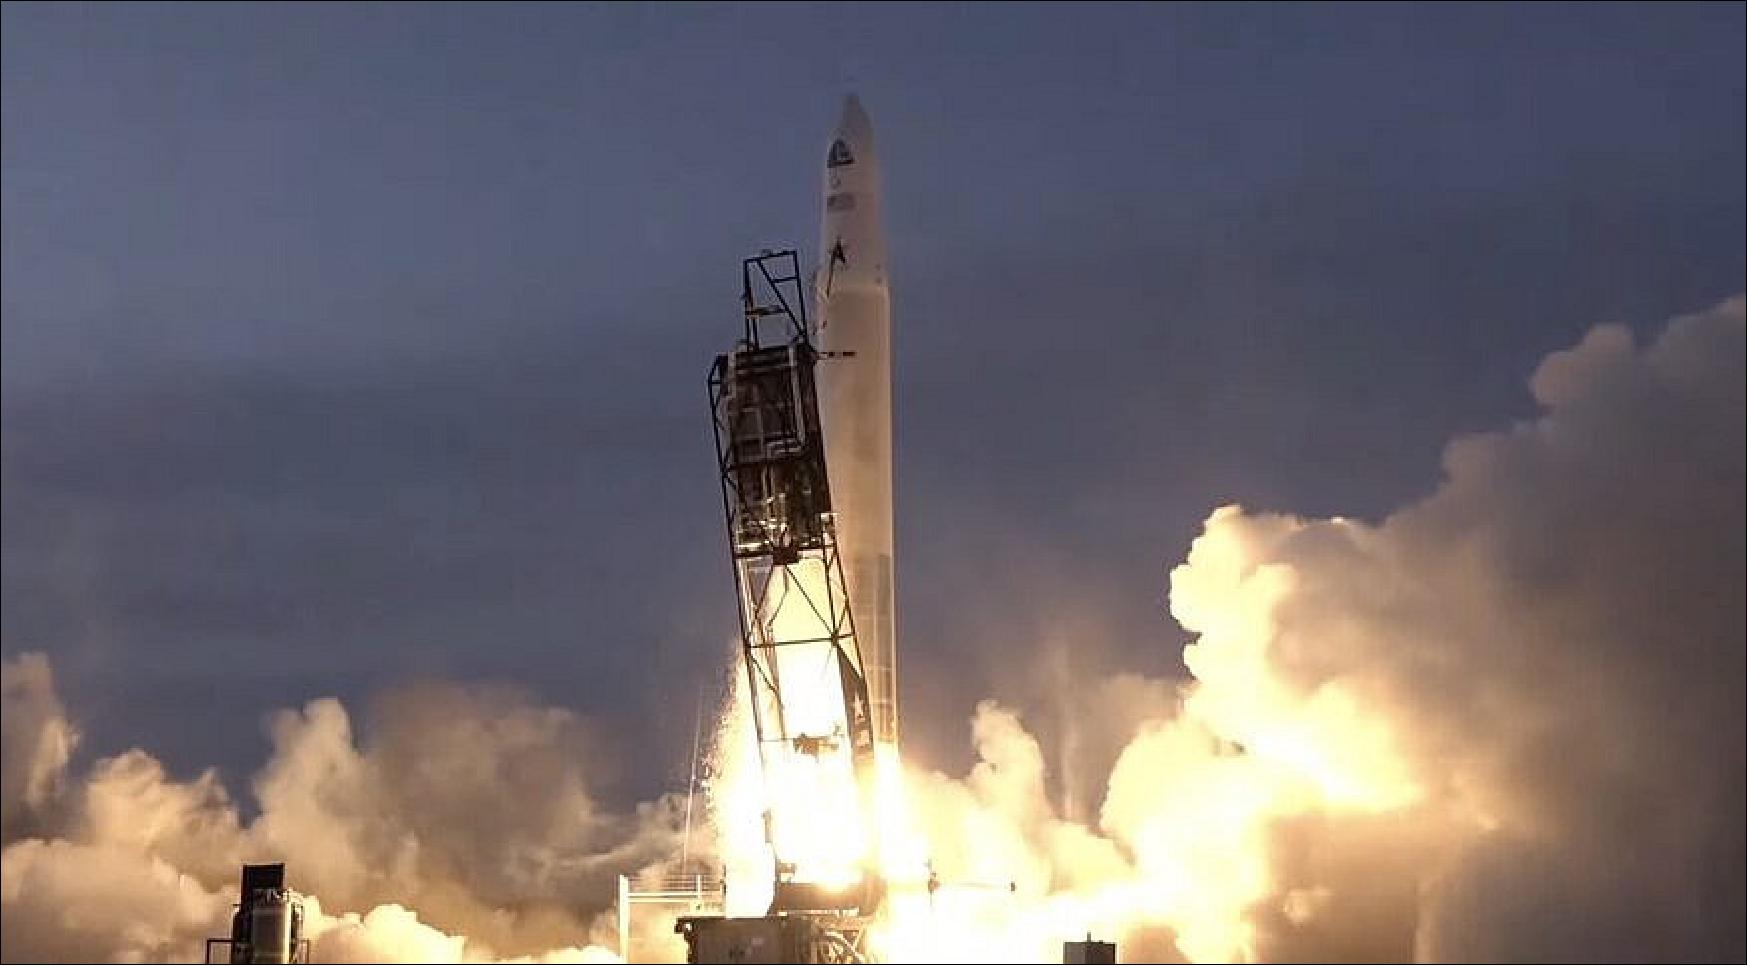 Figure 5: Astra's Rocket 3.3 vehicle lifts off March 15 from Kodiak Island, Alaska, carrying payloads for three customers in a mission arranged by Spaceflight (image credit: NASASpaceflight LLC/Astra Space Inc.)